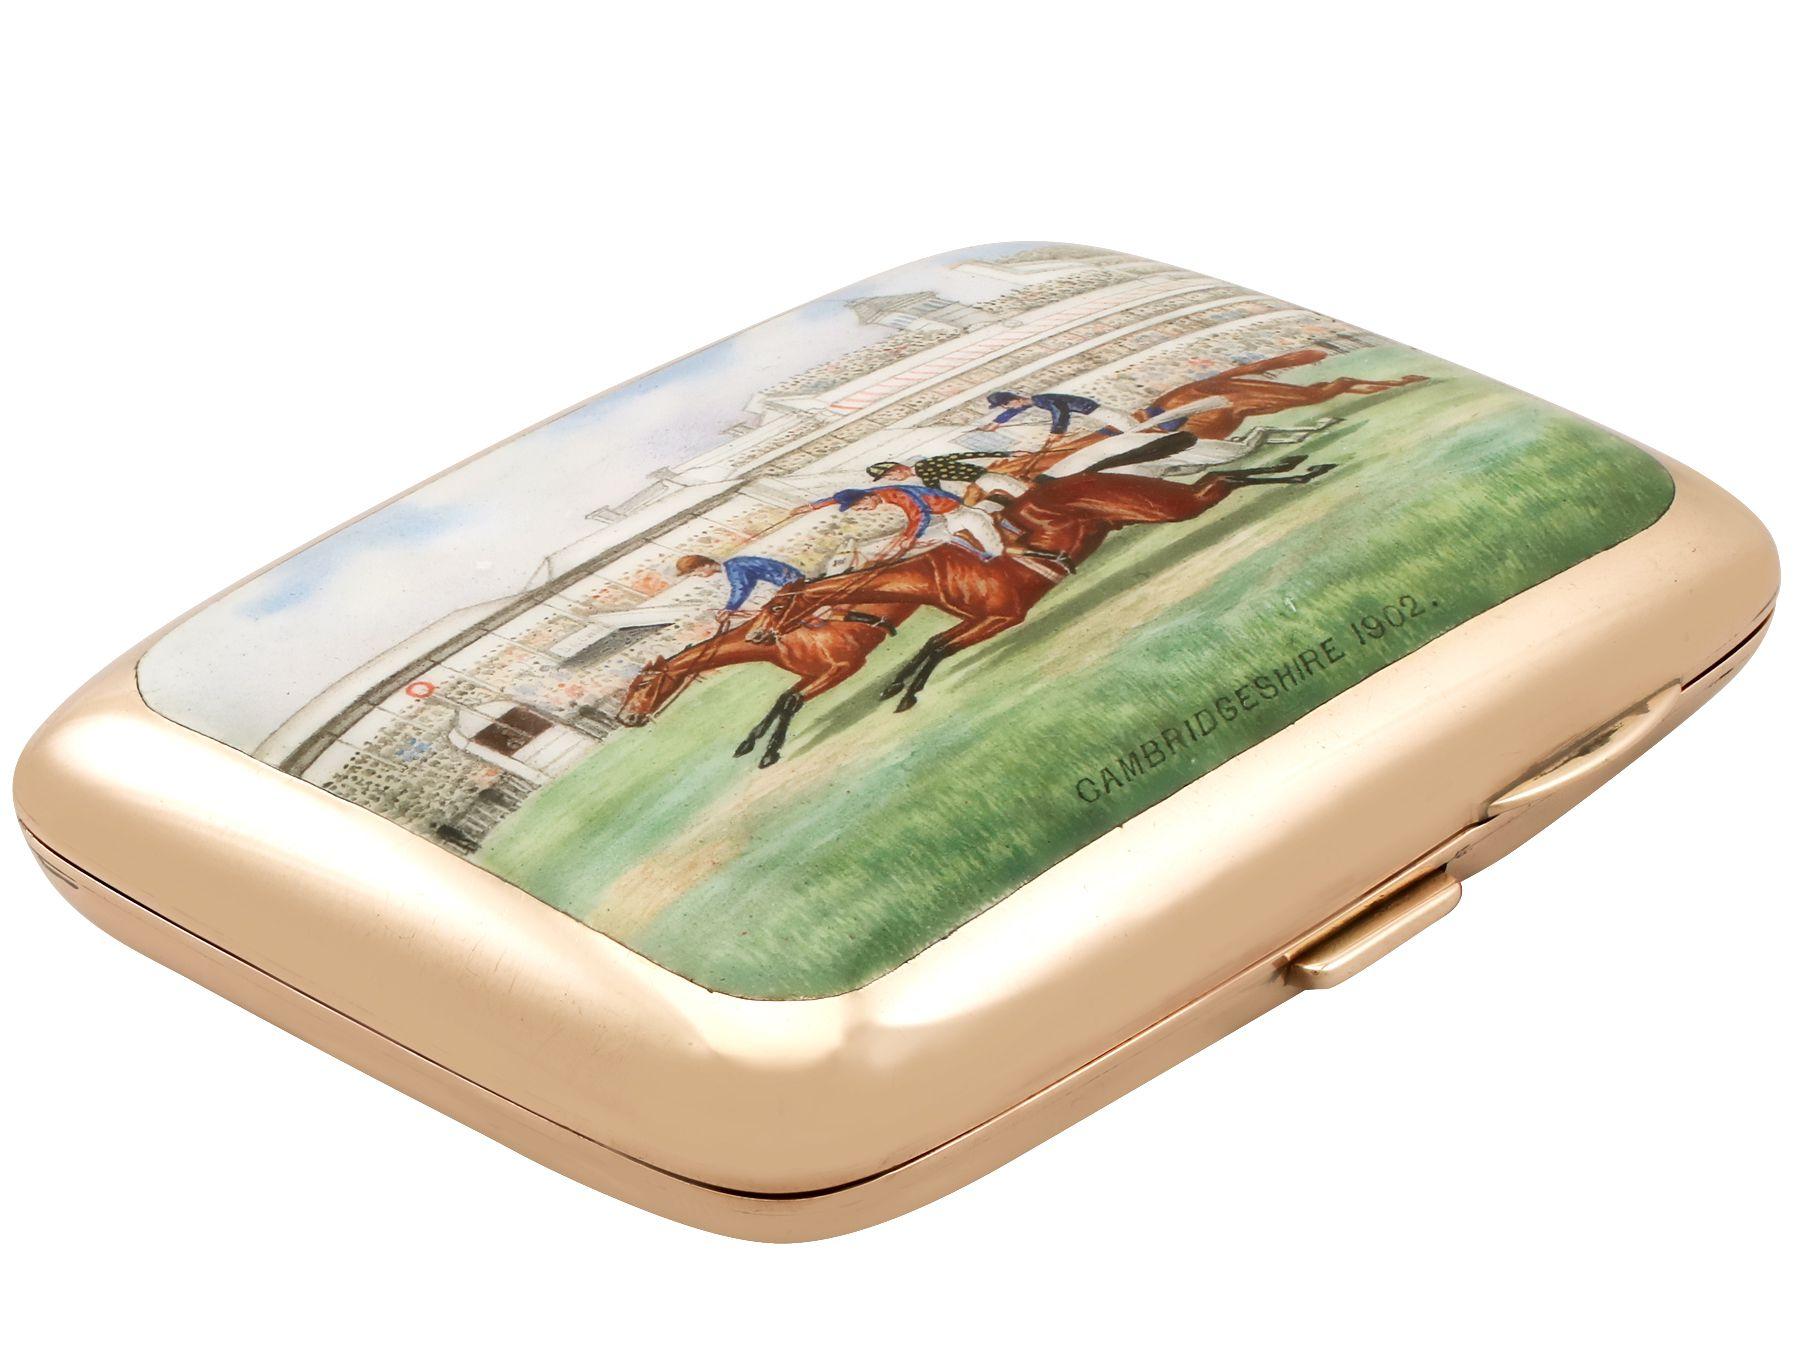 Antique Edwardian 9K Rose Gold and Enamel Cigarette Case In Excellent Condition For Sale In Jesmond, Newcastle Upon Tyne